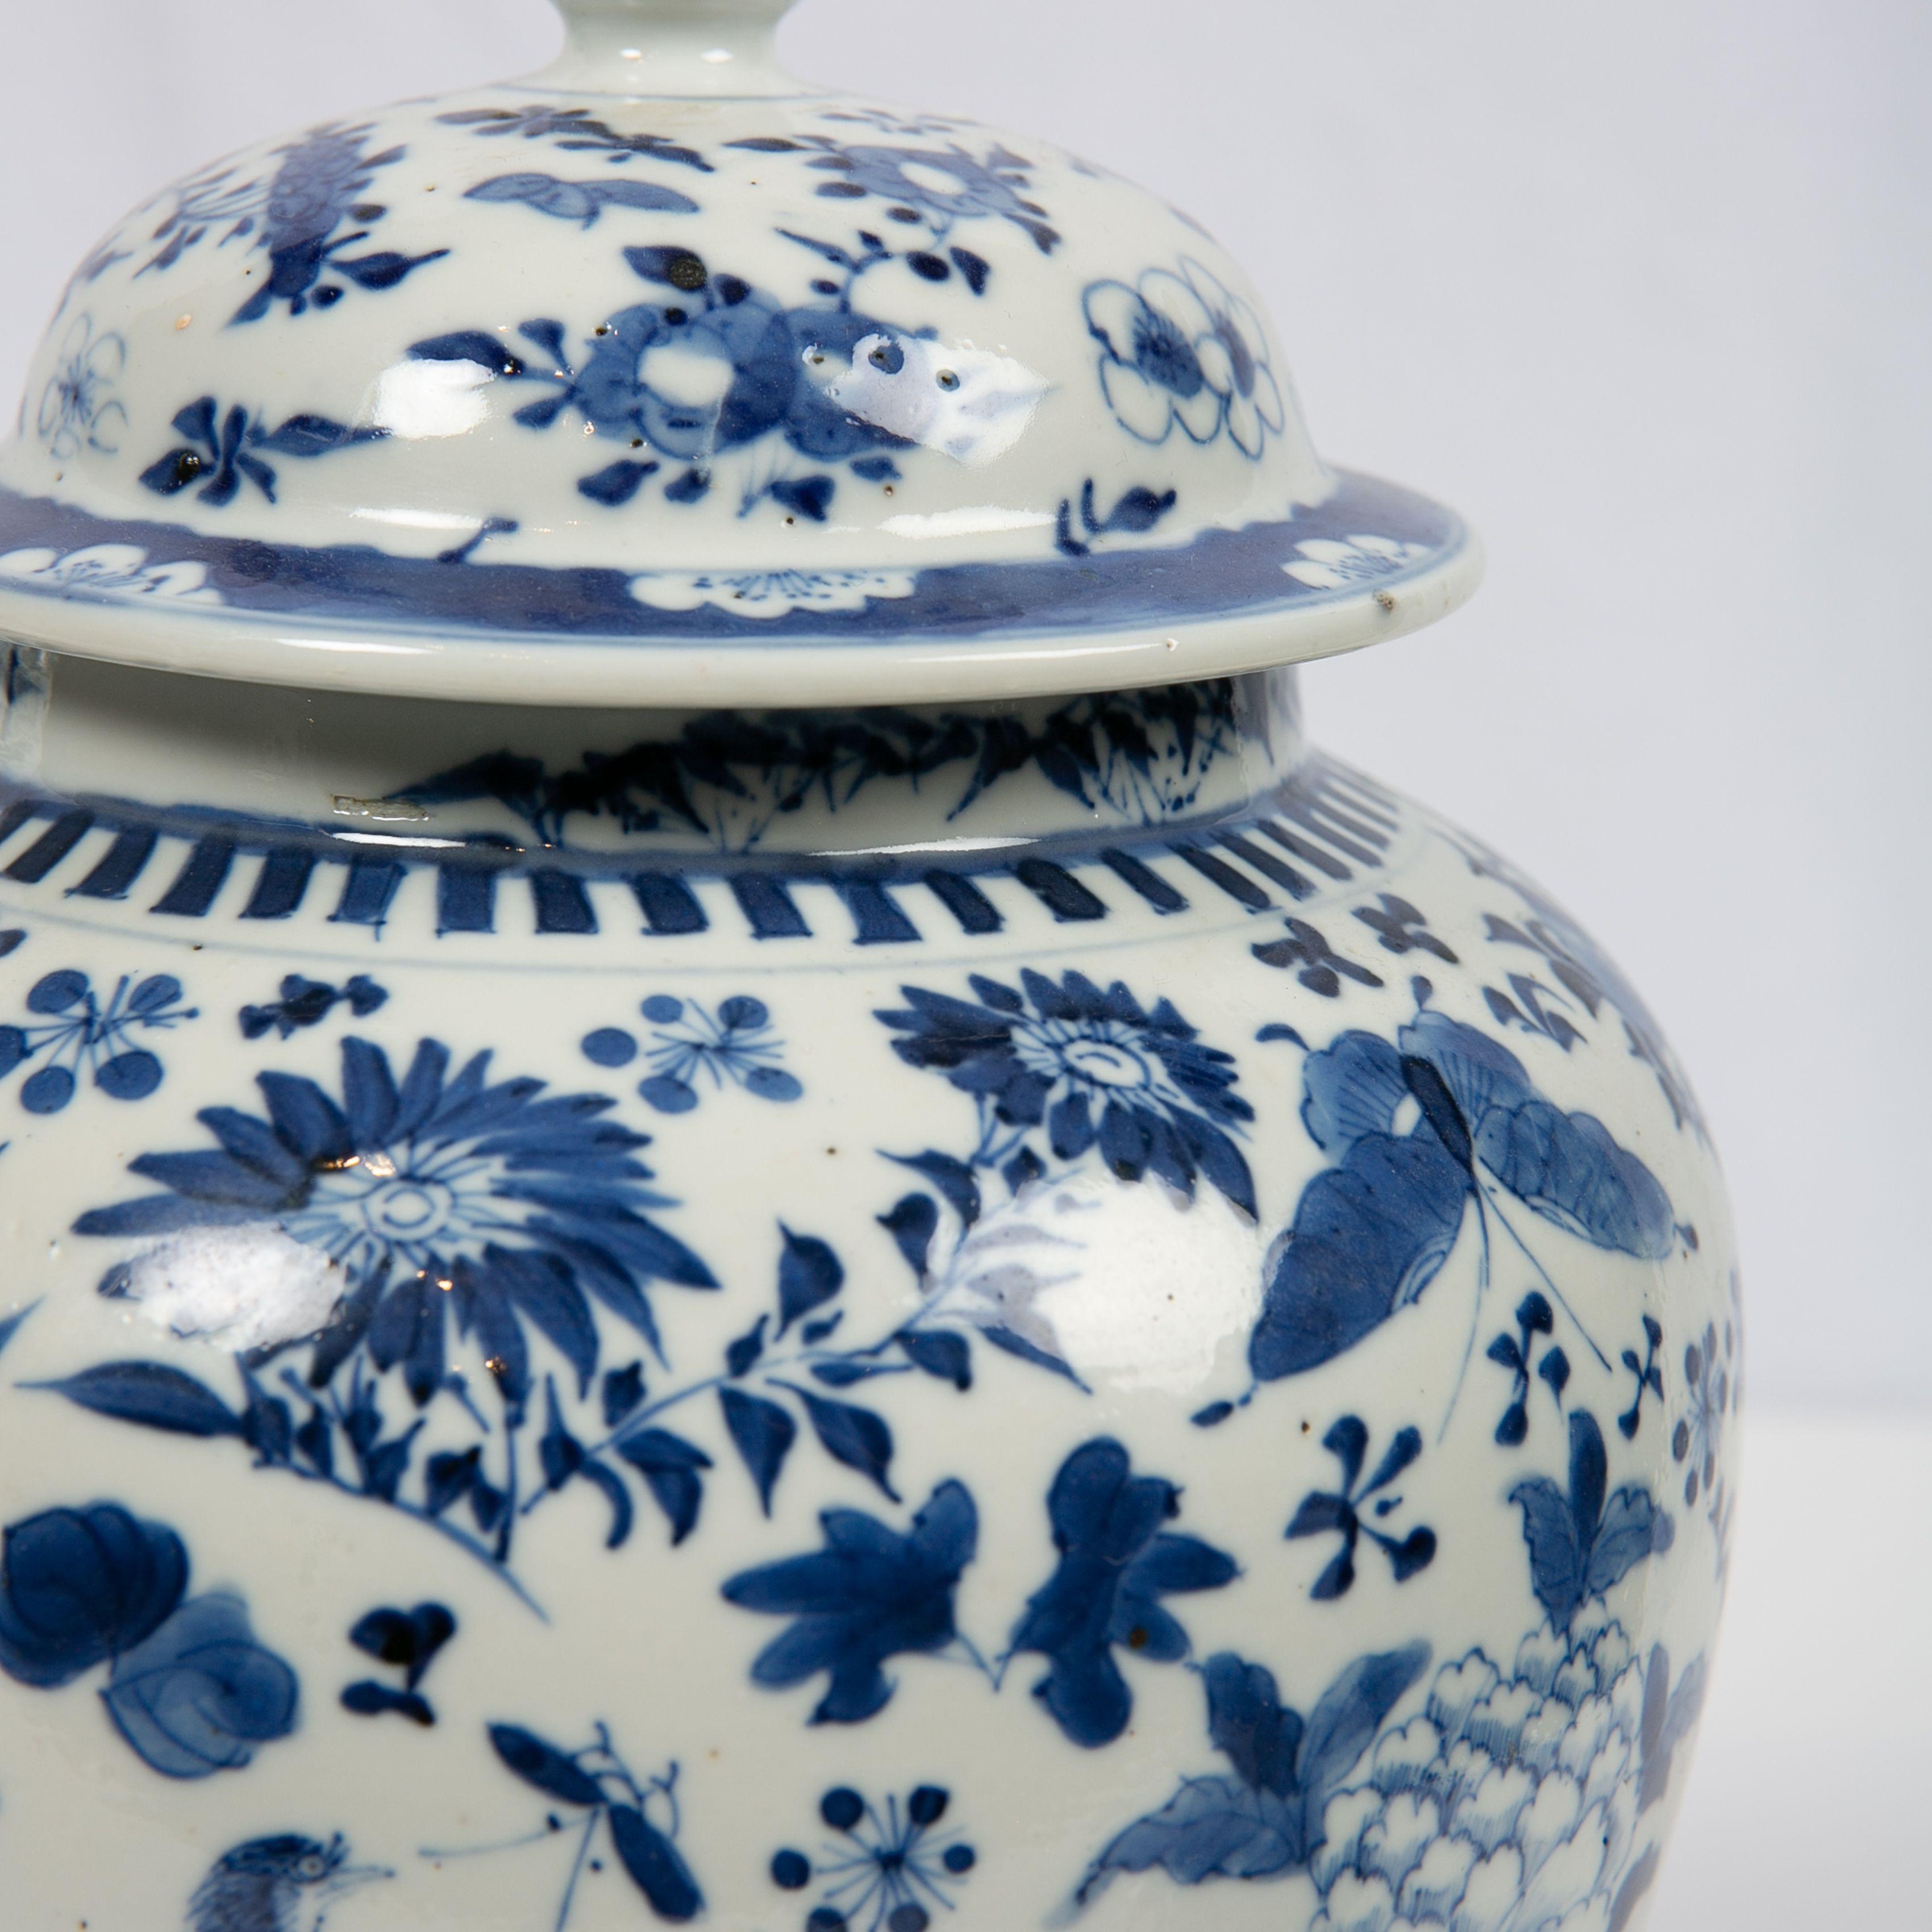 Pair of Chinese Porcelain Blue and White Covered Jars 19th Century Qing Dynasty 9